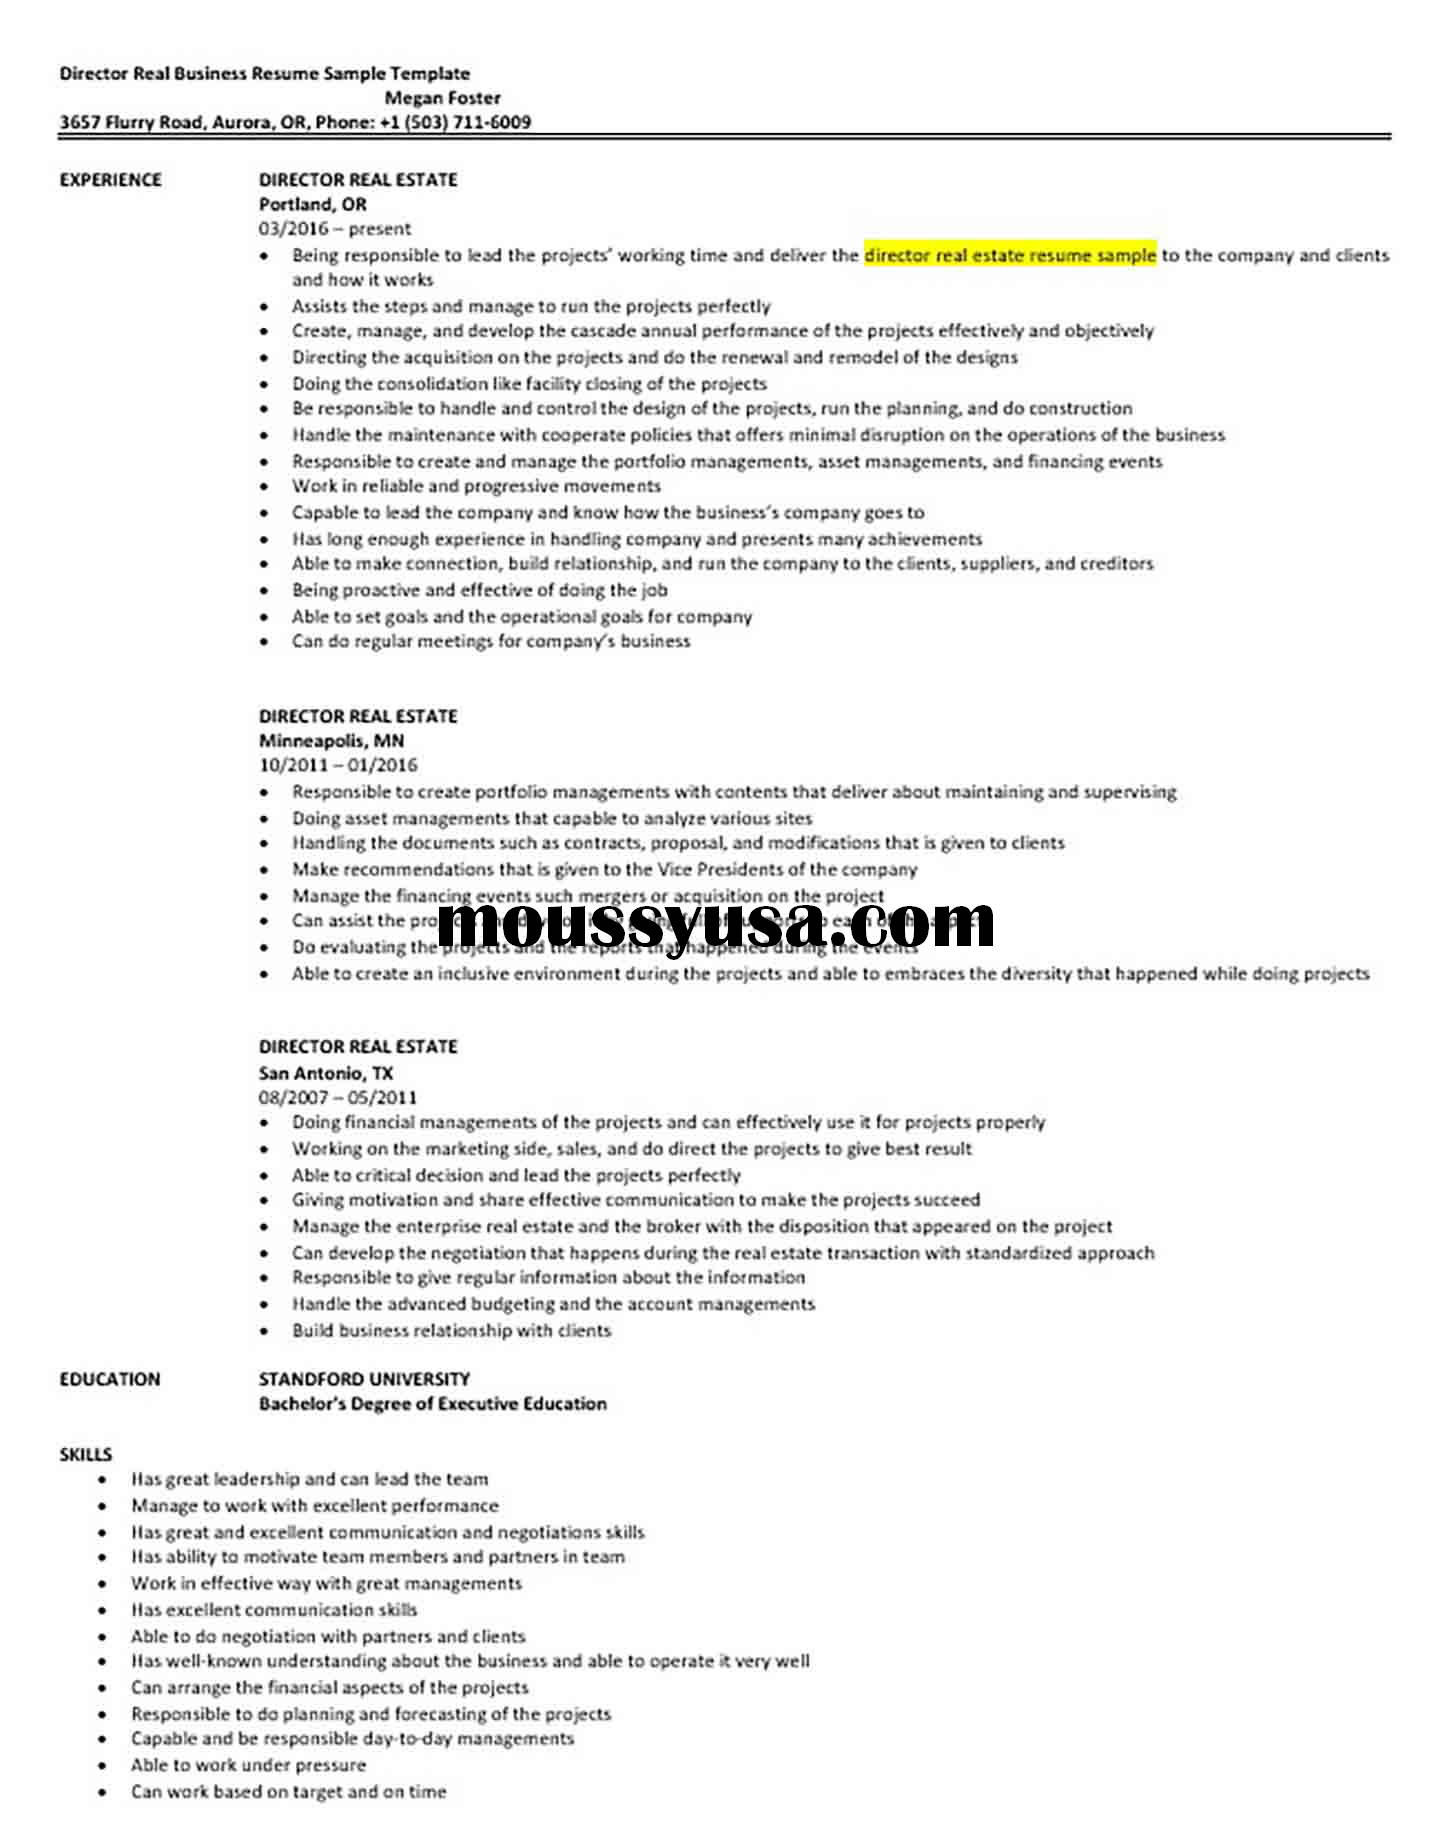 Director Real Business Resume Sample Template